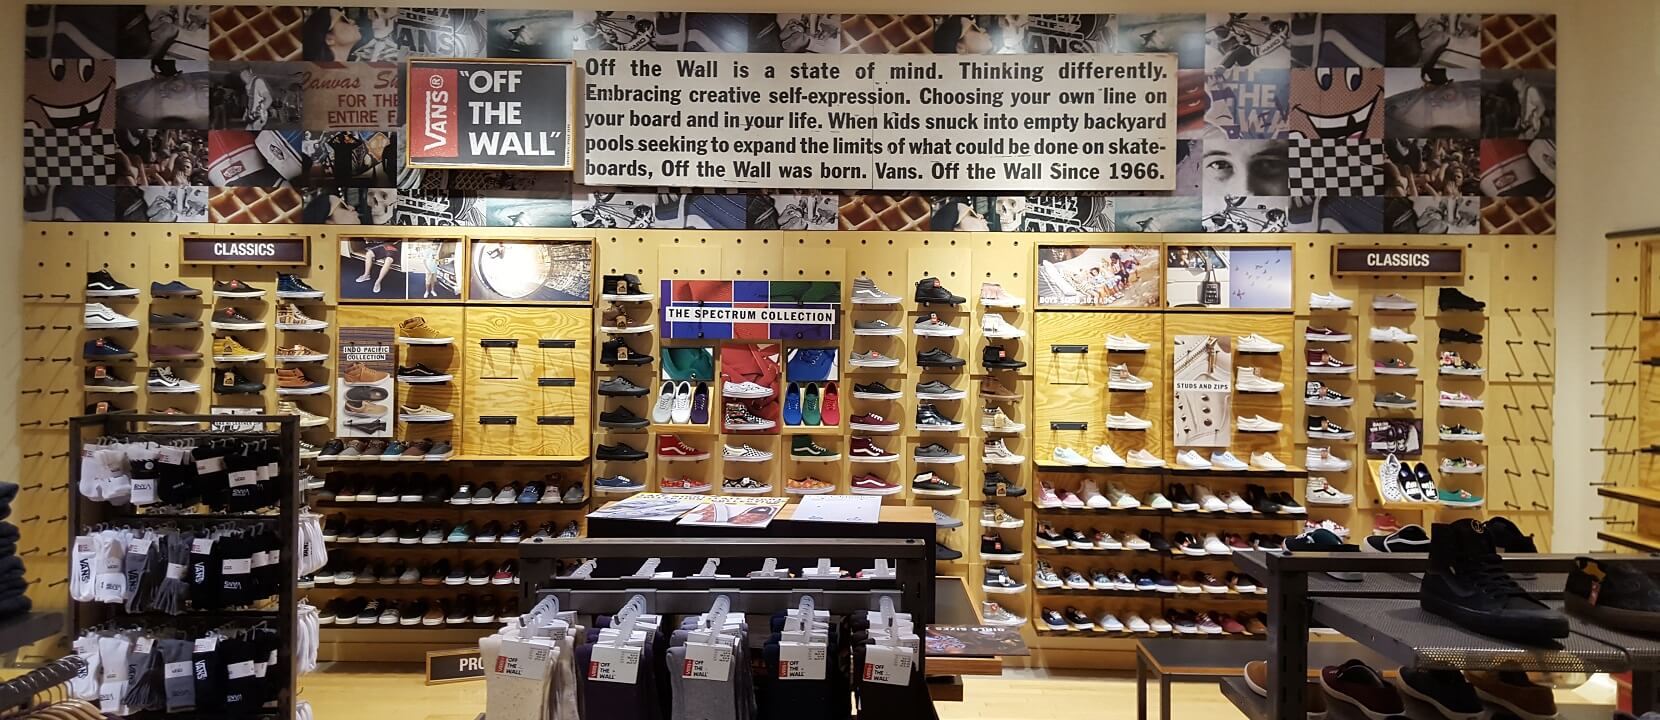 Nationwide Fixture Installations Inc Vans Case Study New Store Installation Shop-in-Shop Signage Millwork Packages